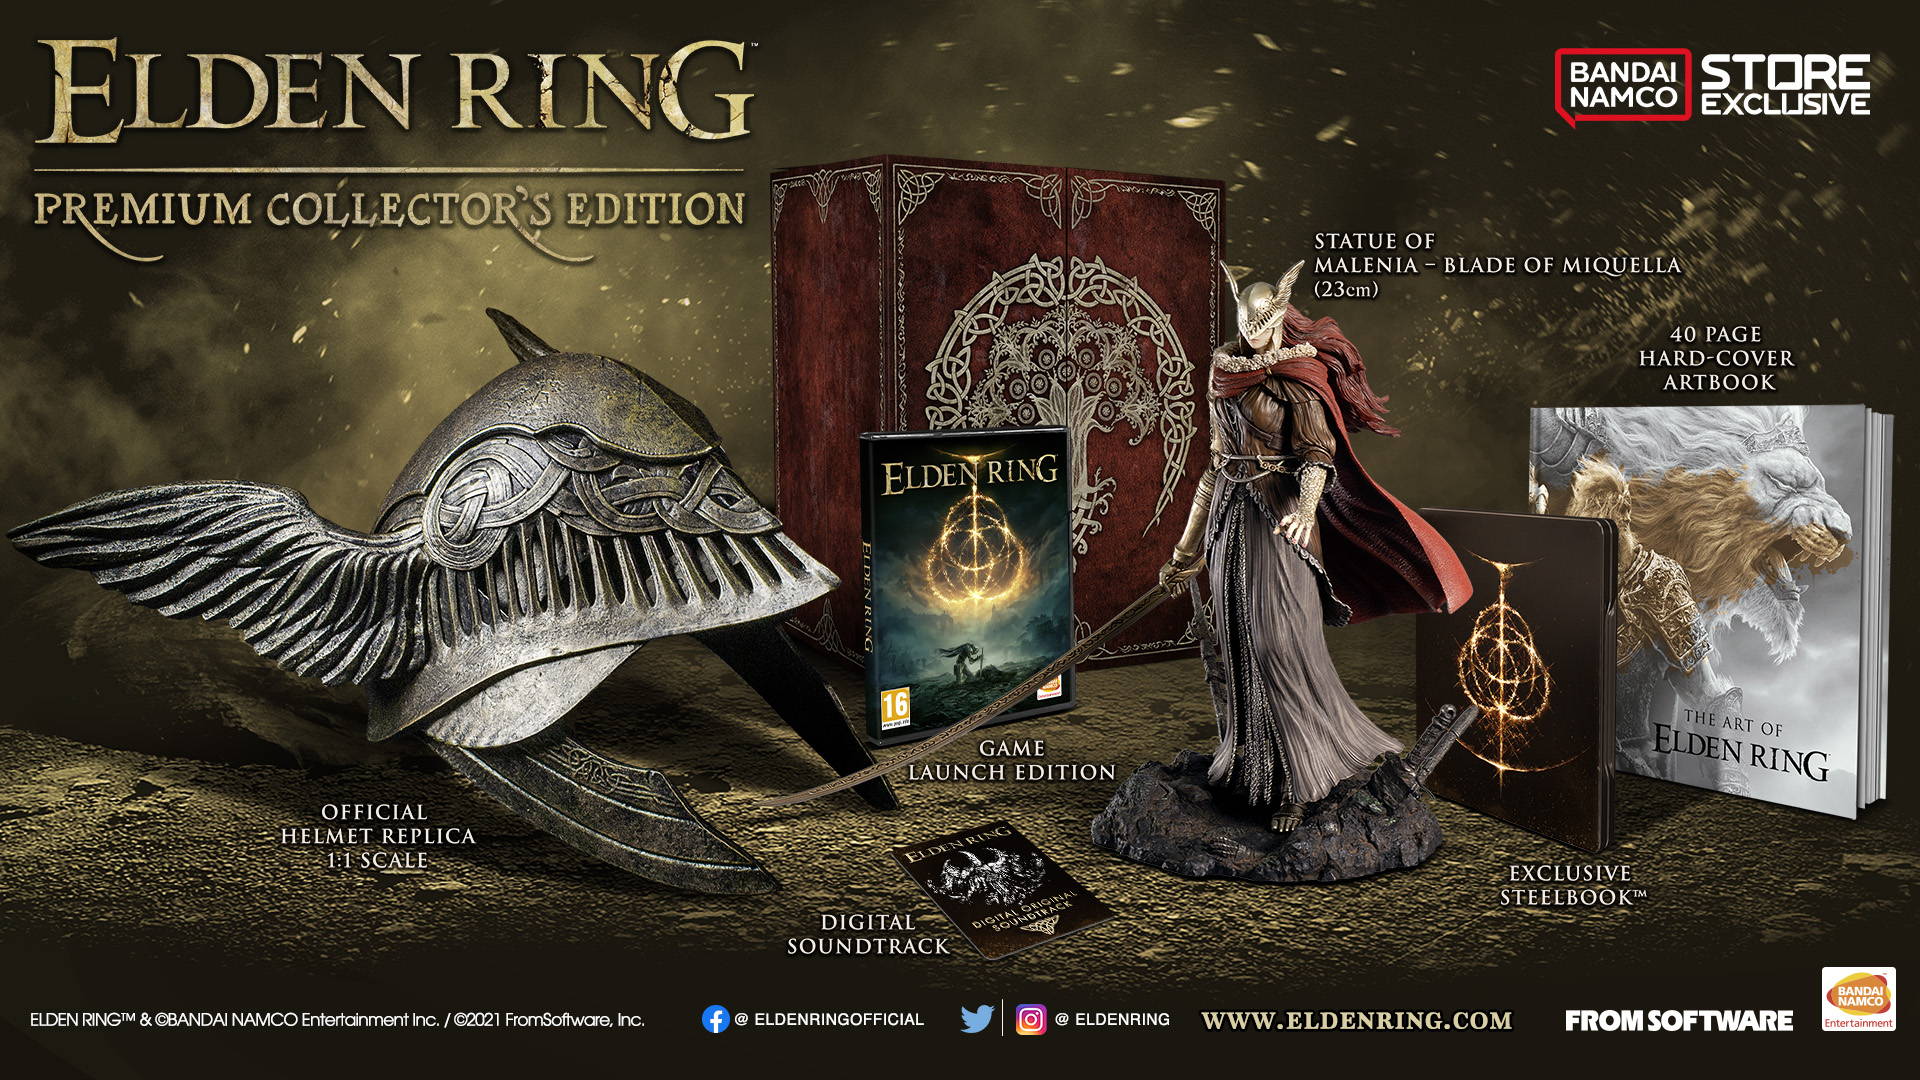 ELDEN RING Physical Full Game [PS4] - PREMIUM COLLECTOR'S EDITION